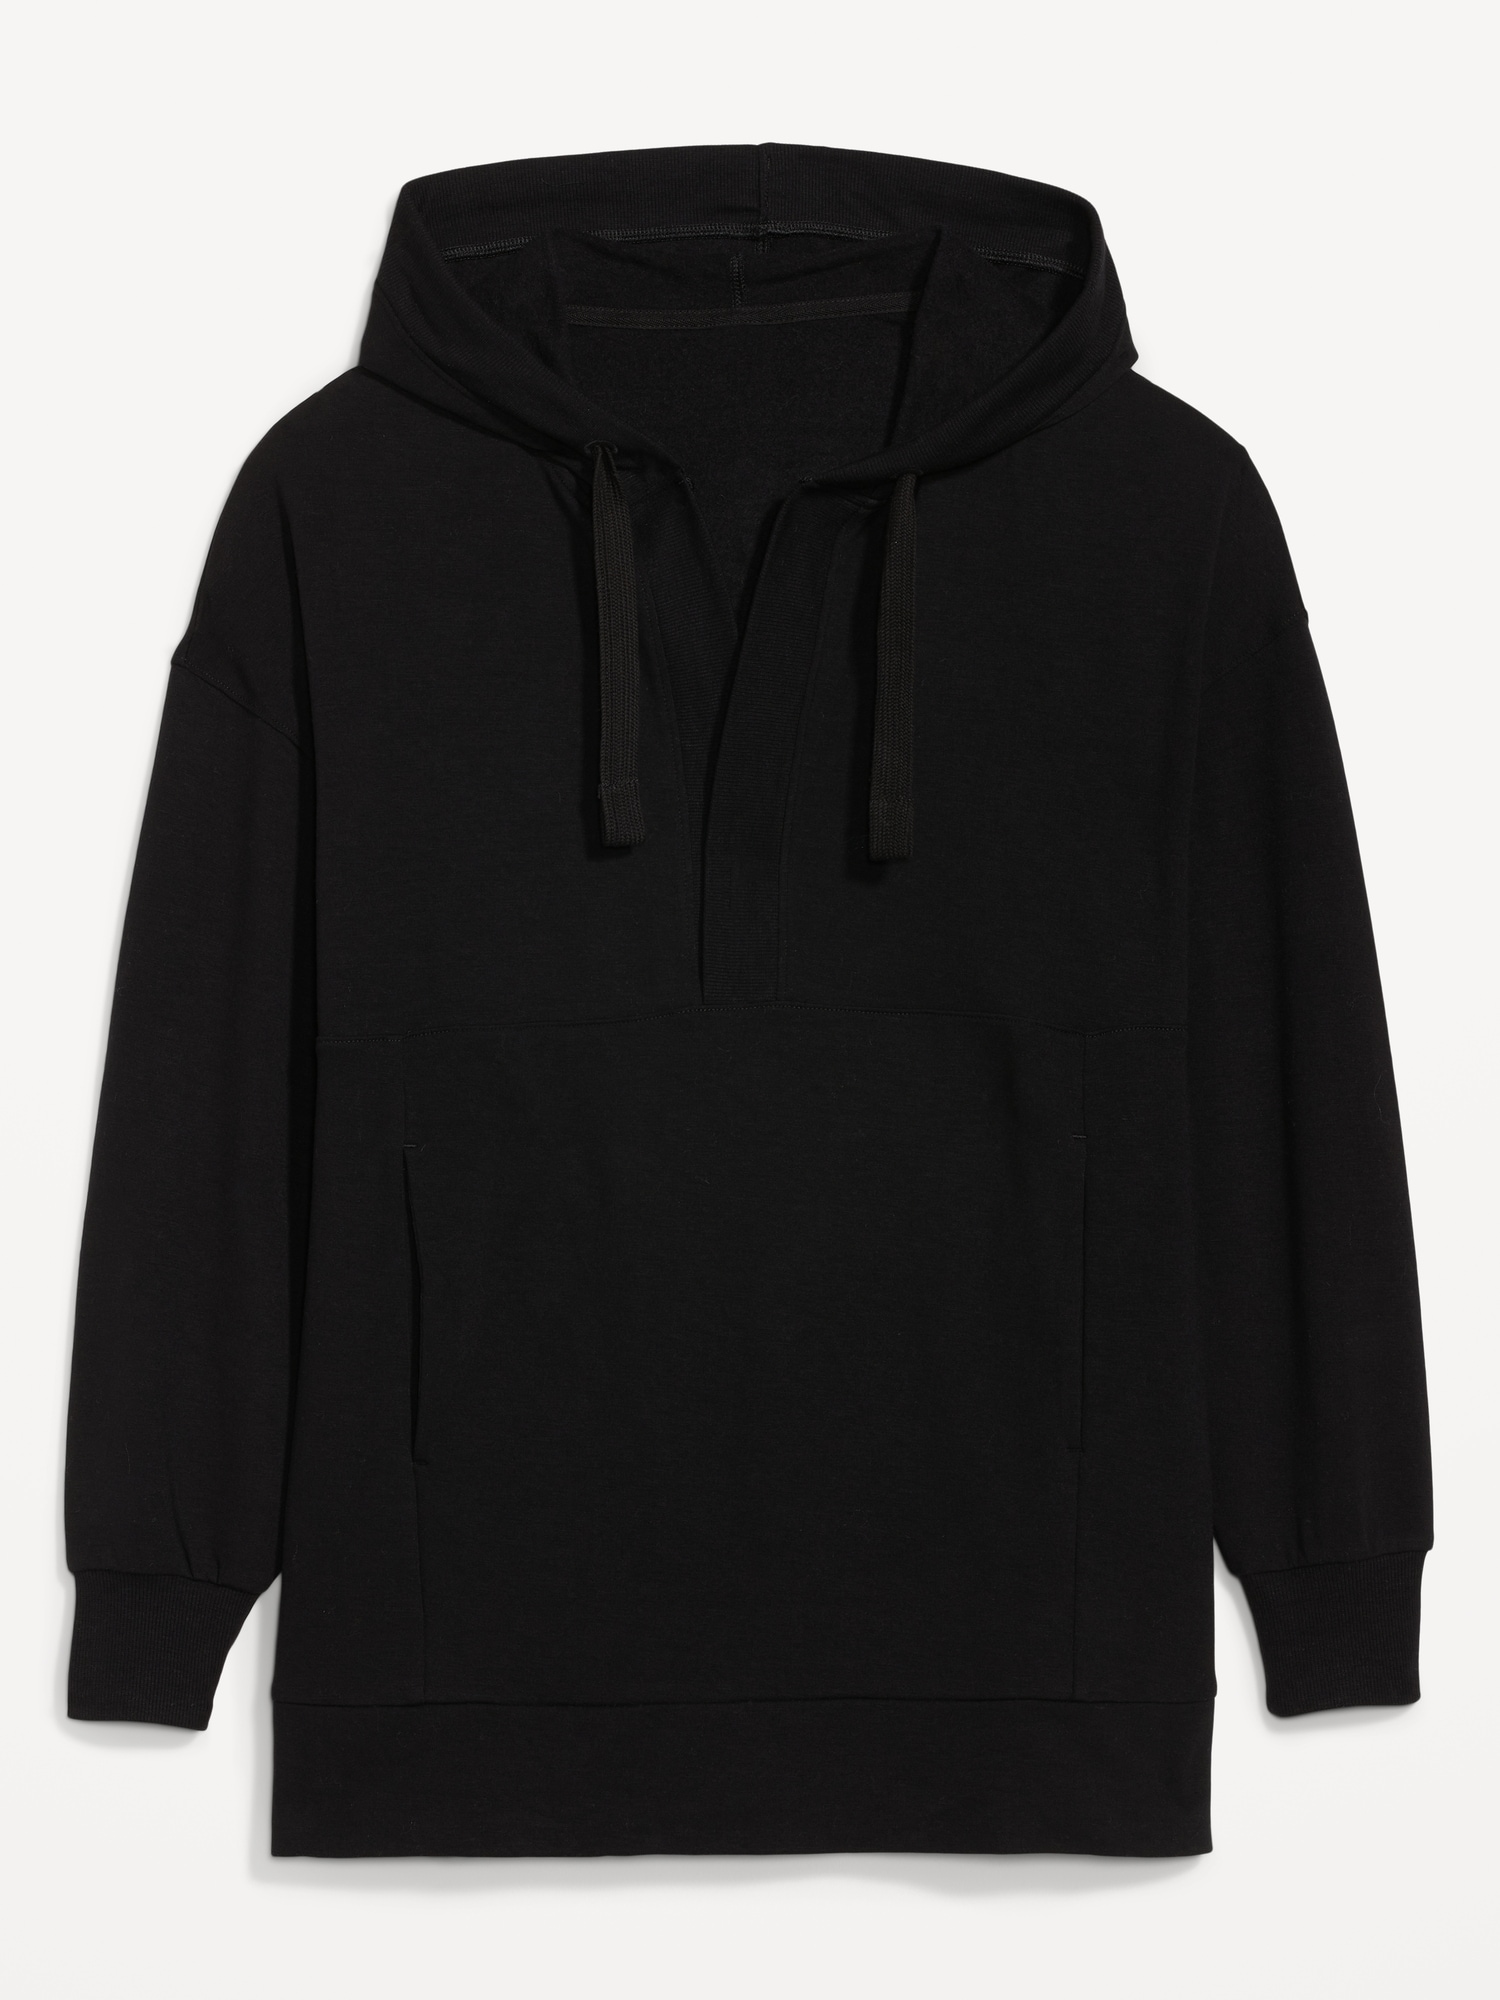 Oversized Live-In French-Terry Tunic Hoodie for Women | Old Navy